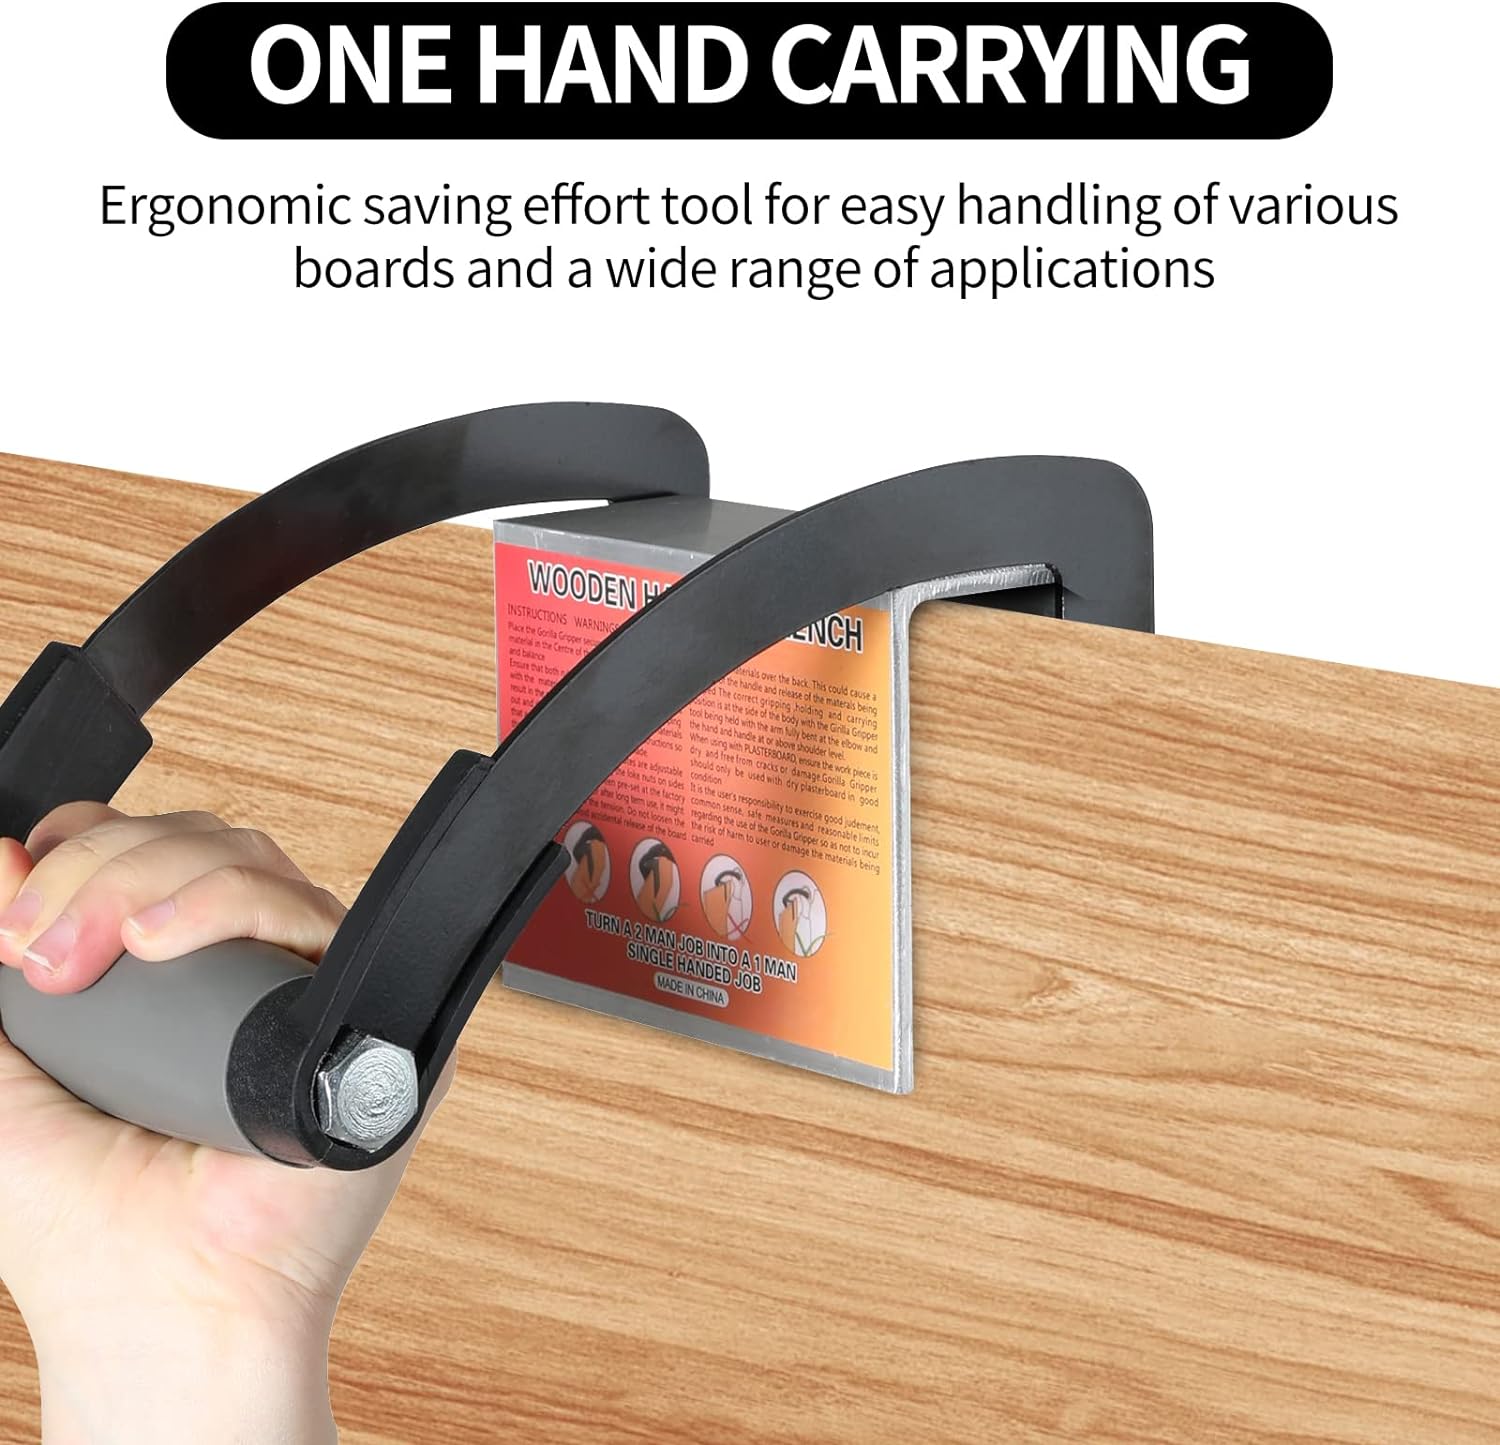 Auto Adjusting Drywall Carrying Tool